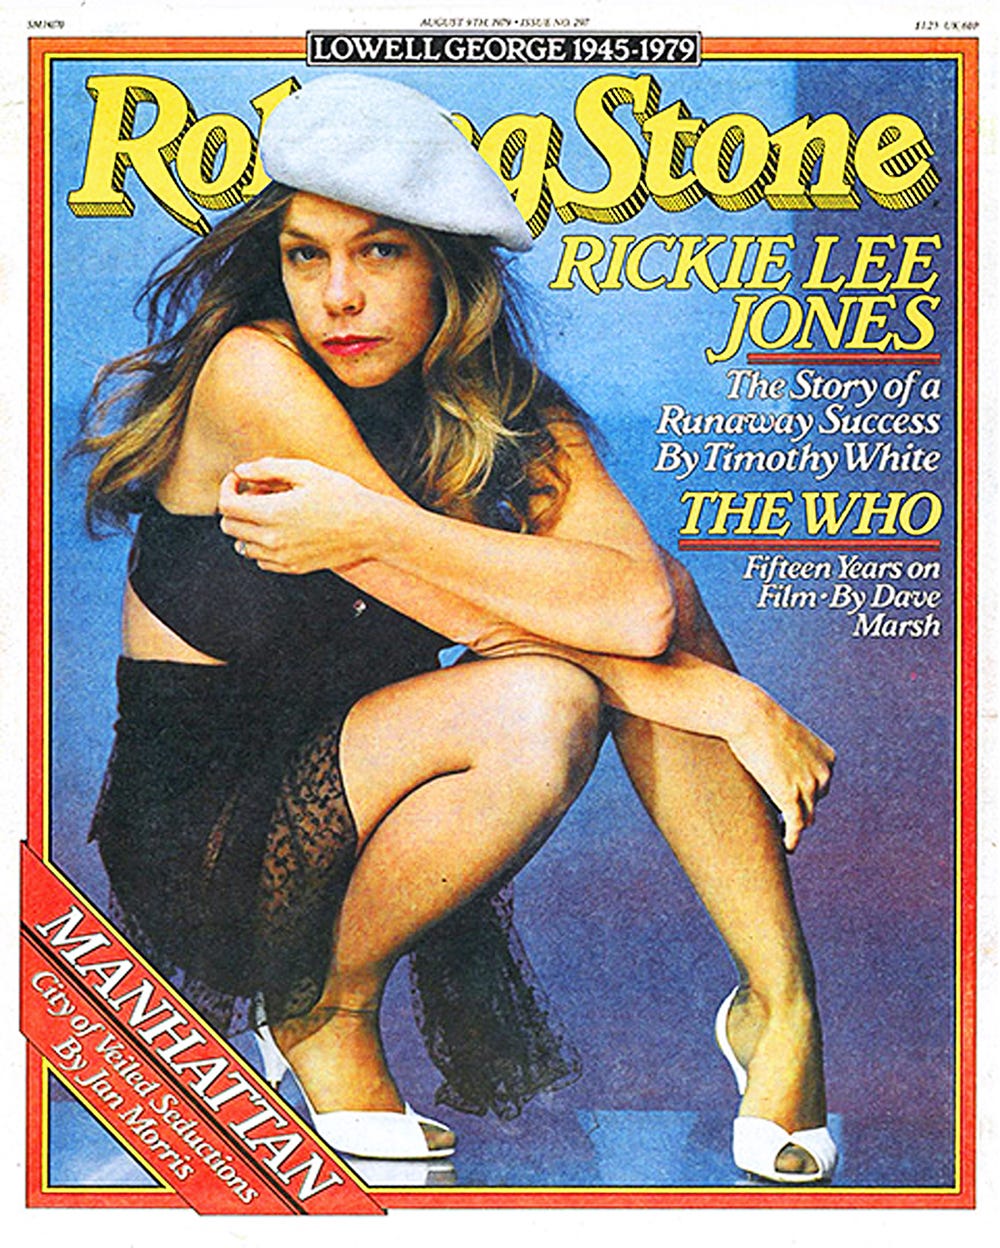 The Enigma of Rickie Lee Jones - by Ted Gioia